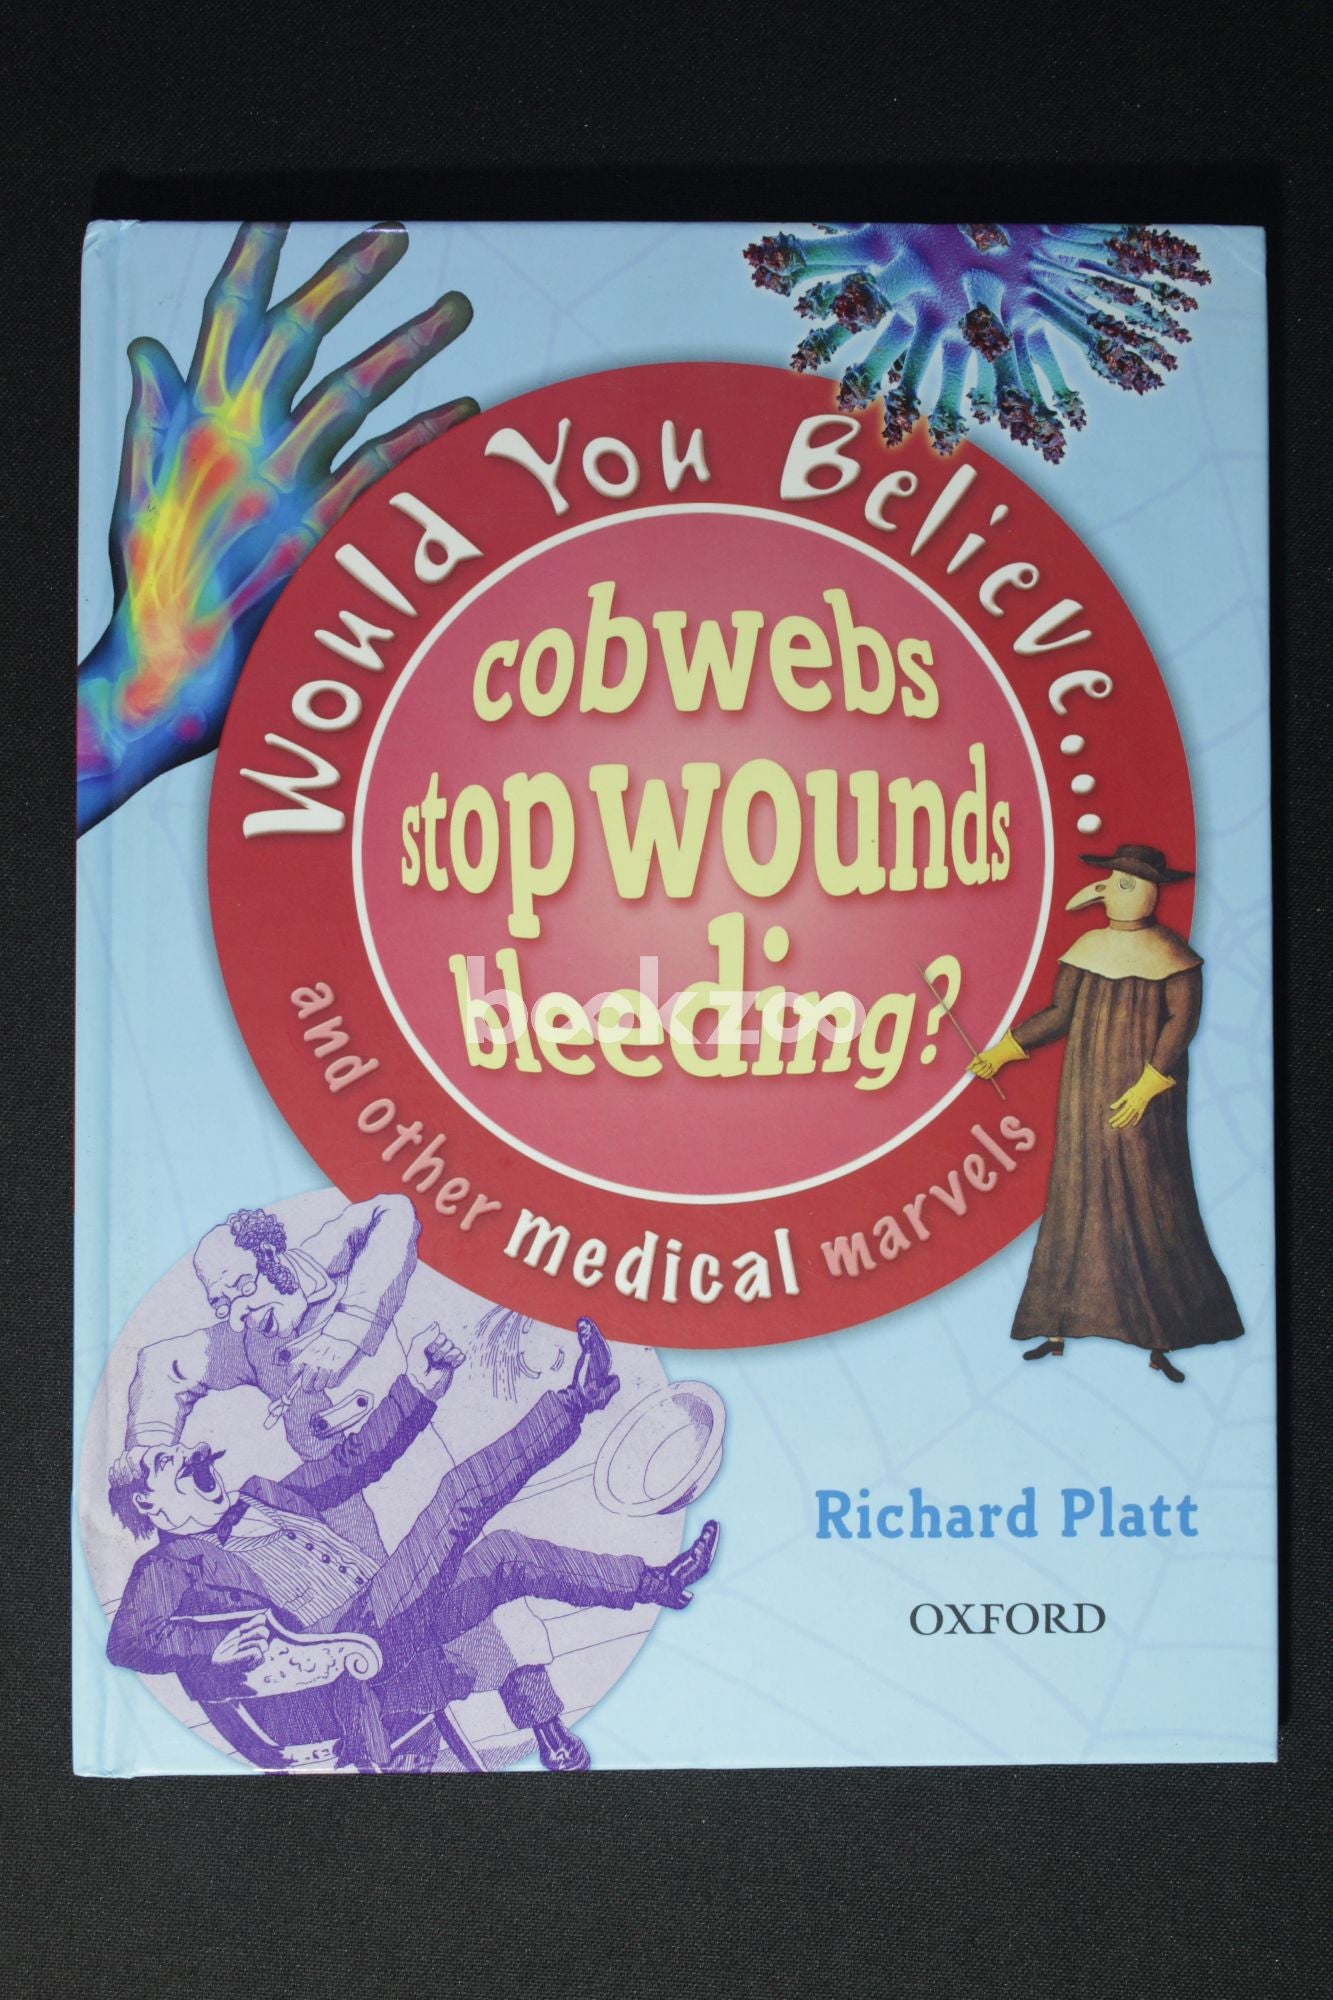 at　Cobwebs　Richard　Stop　by　Buy　And　Bleeding?　—　Would　Medical　Marvels　You　Online　Believe　Wounds　Platt　Other　bookstore